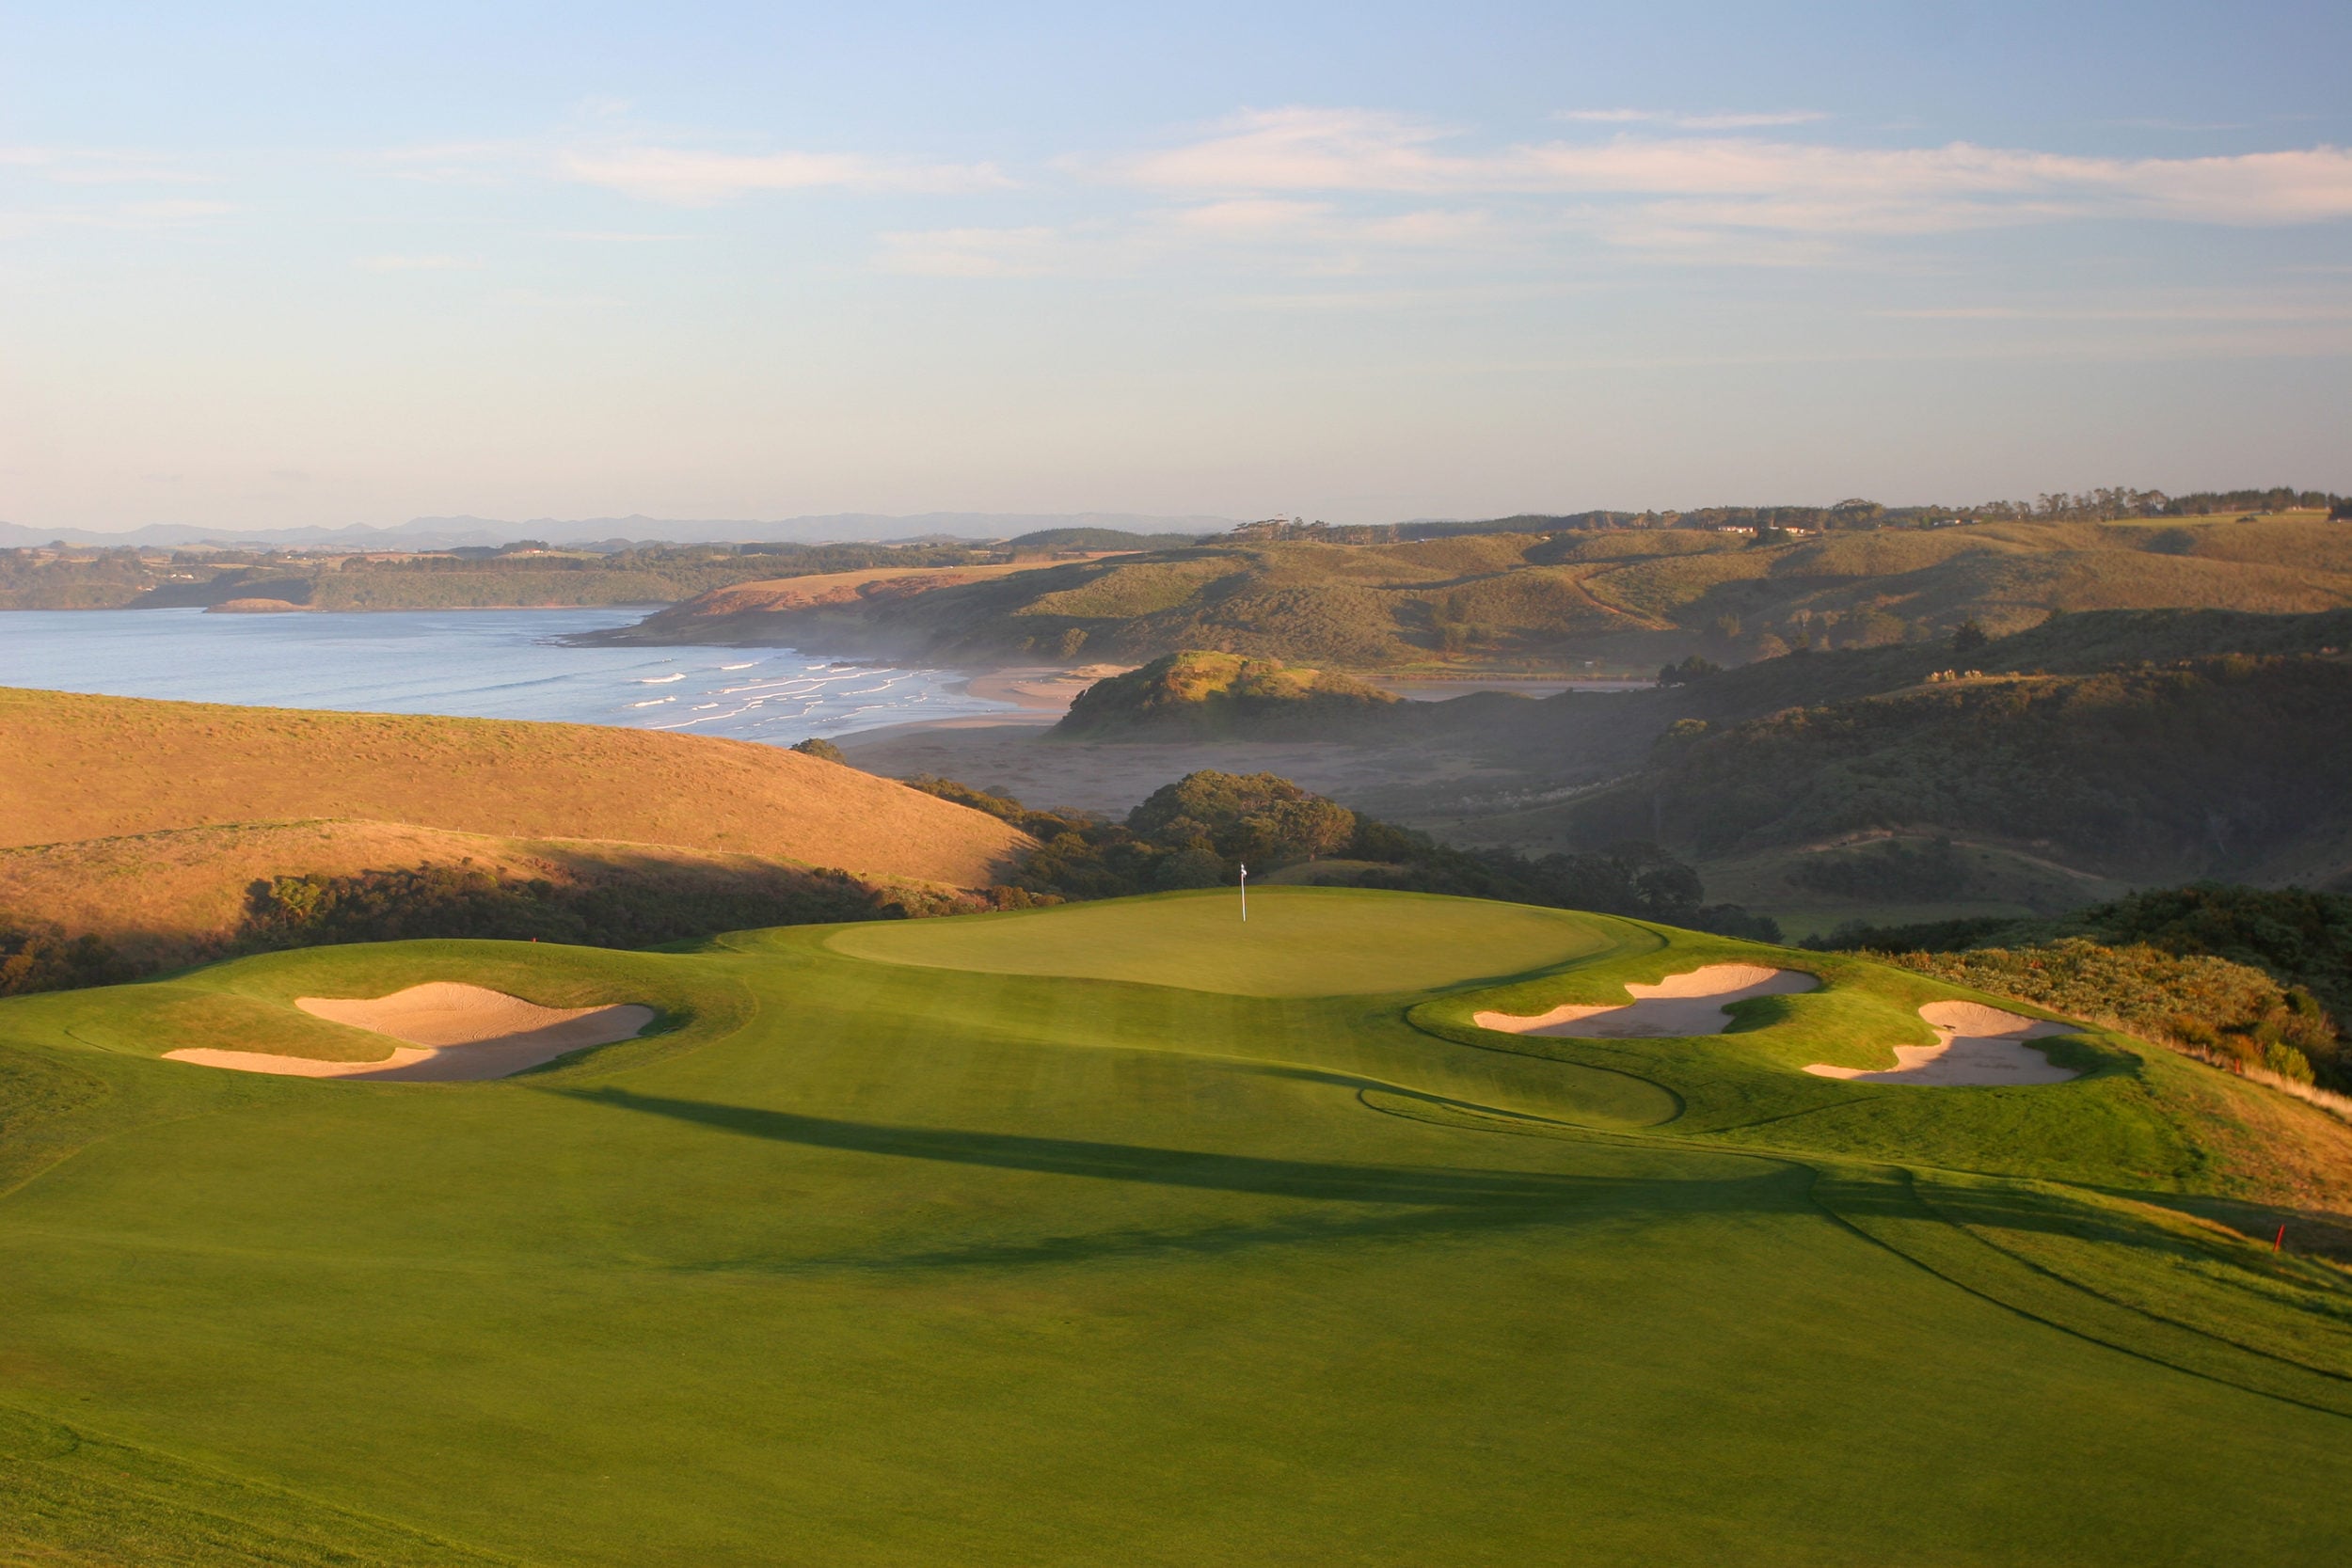 Dusk image overlooking the 4th hole at Kauri Cliffs Golf Course